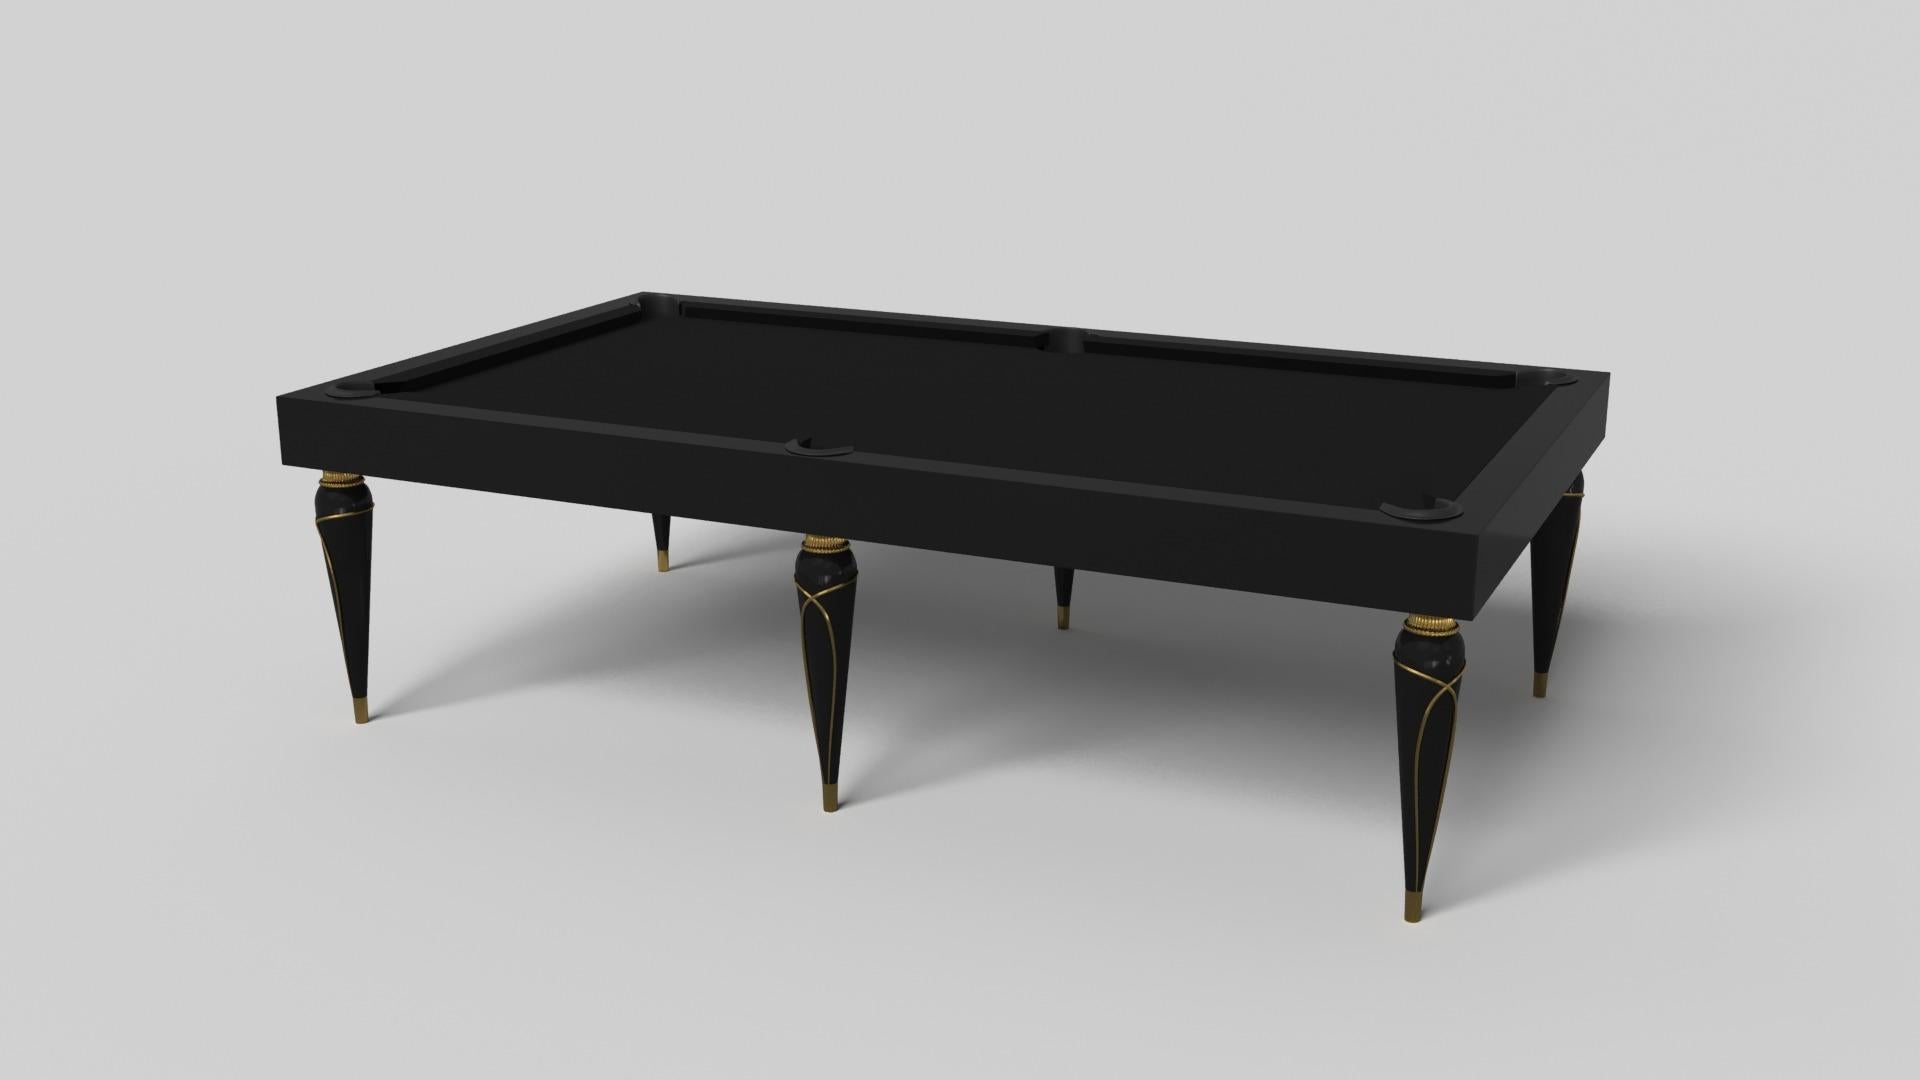 Champagne gold accents add undeniable elegance to this luxury pool table. Offering superior playability and uncompromised style, this design features hand carved details, decorative metal elements, and metal sabots at the bottom of each leg. The